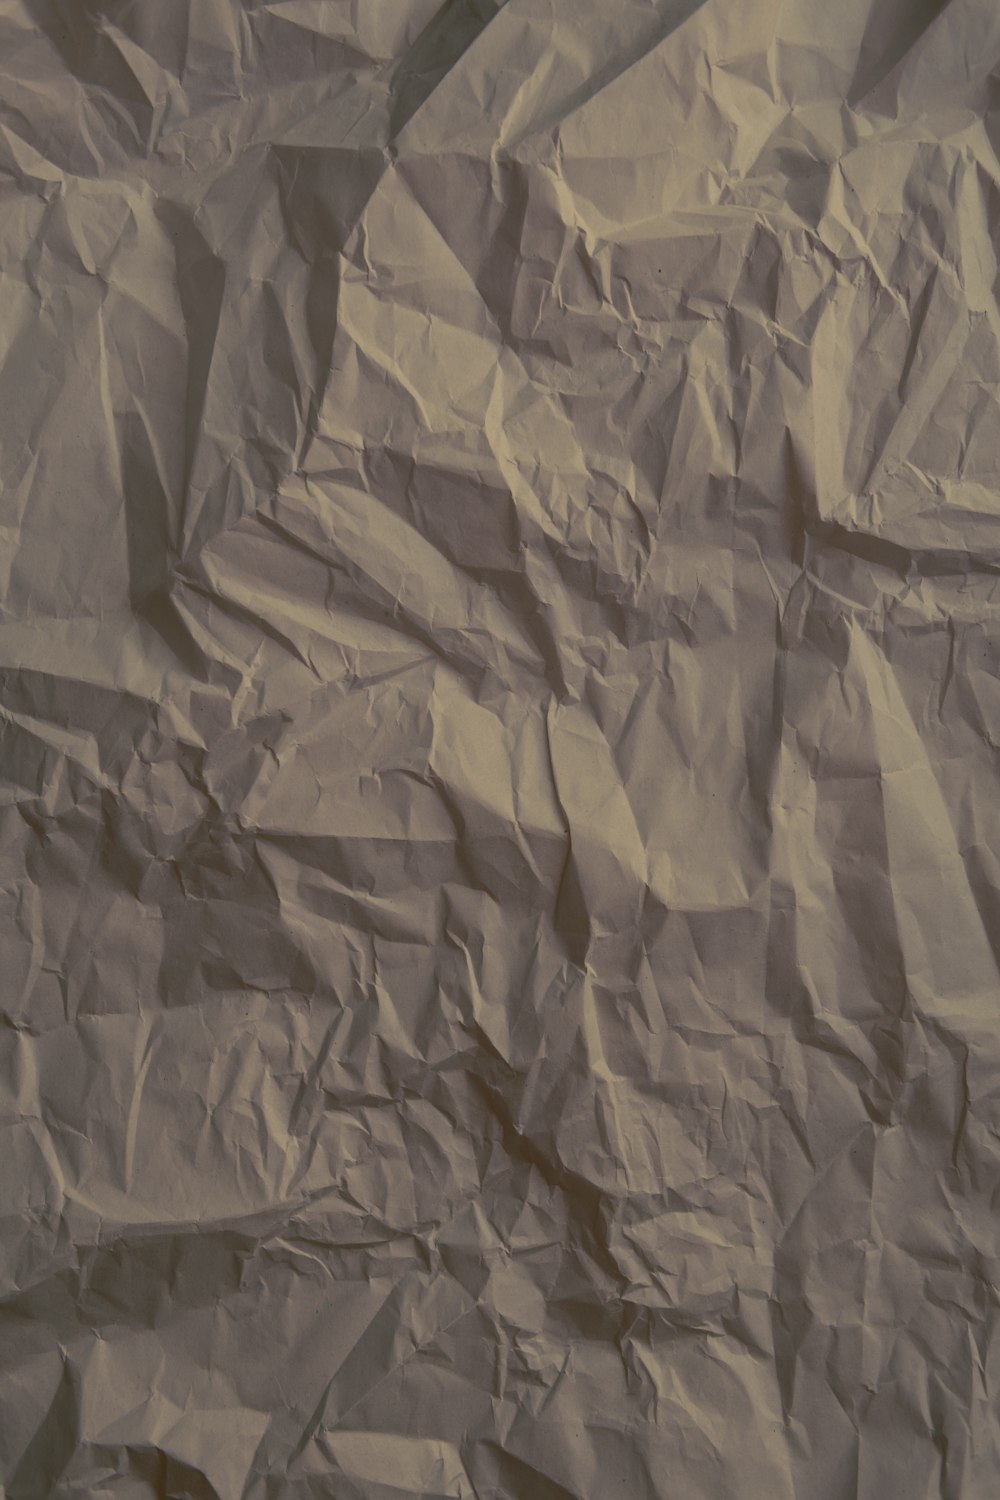 a piece of paper that has been wrinkled